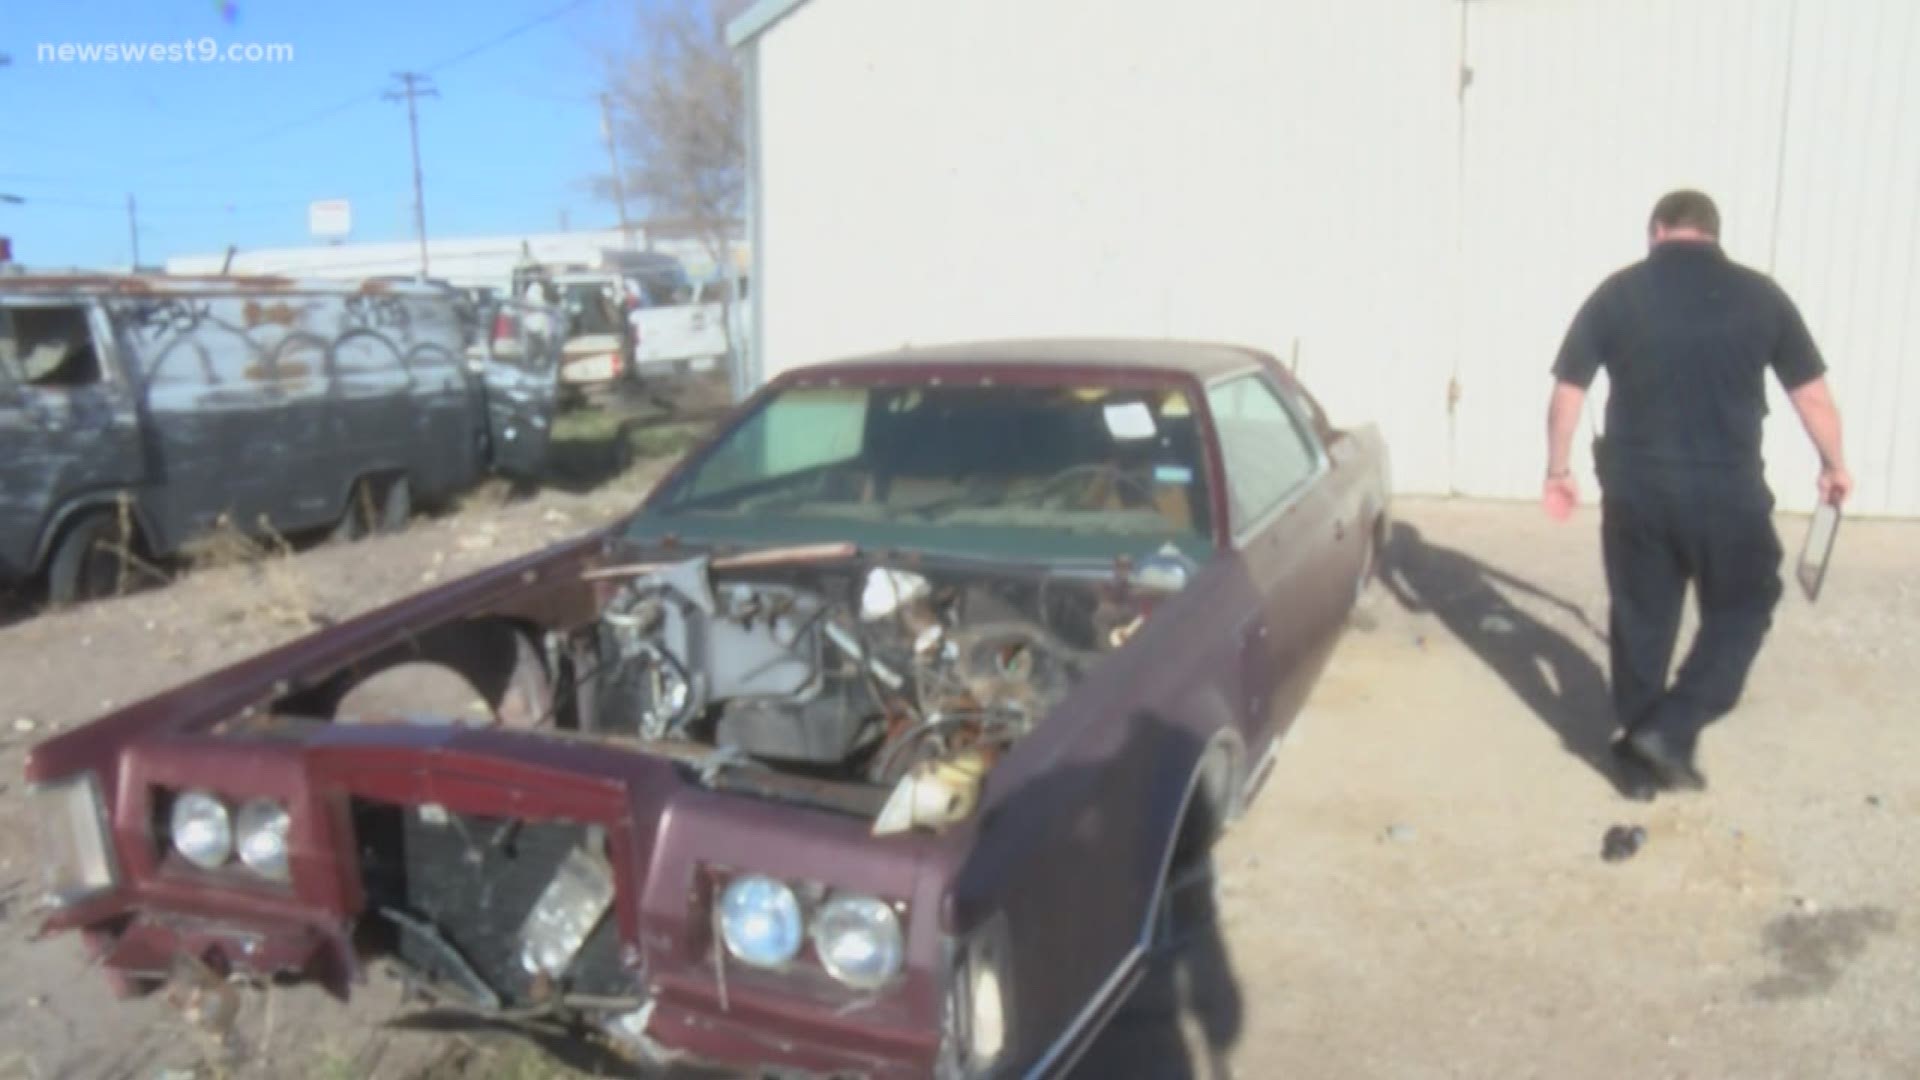 "Junked vehicles we see them every day," Darlene Mays said.